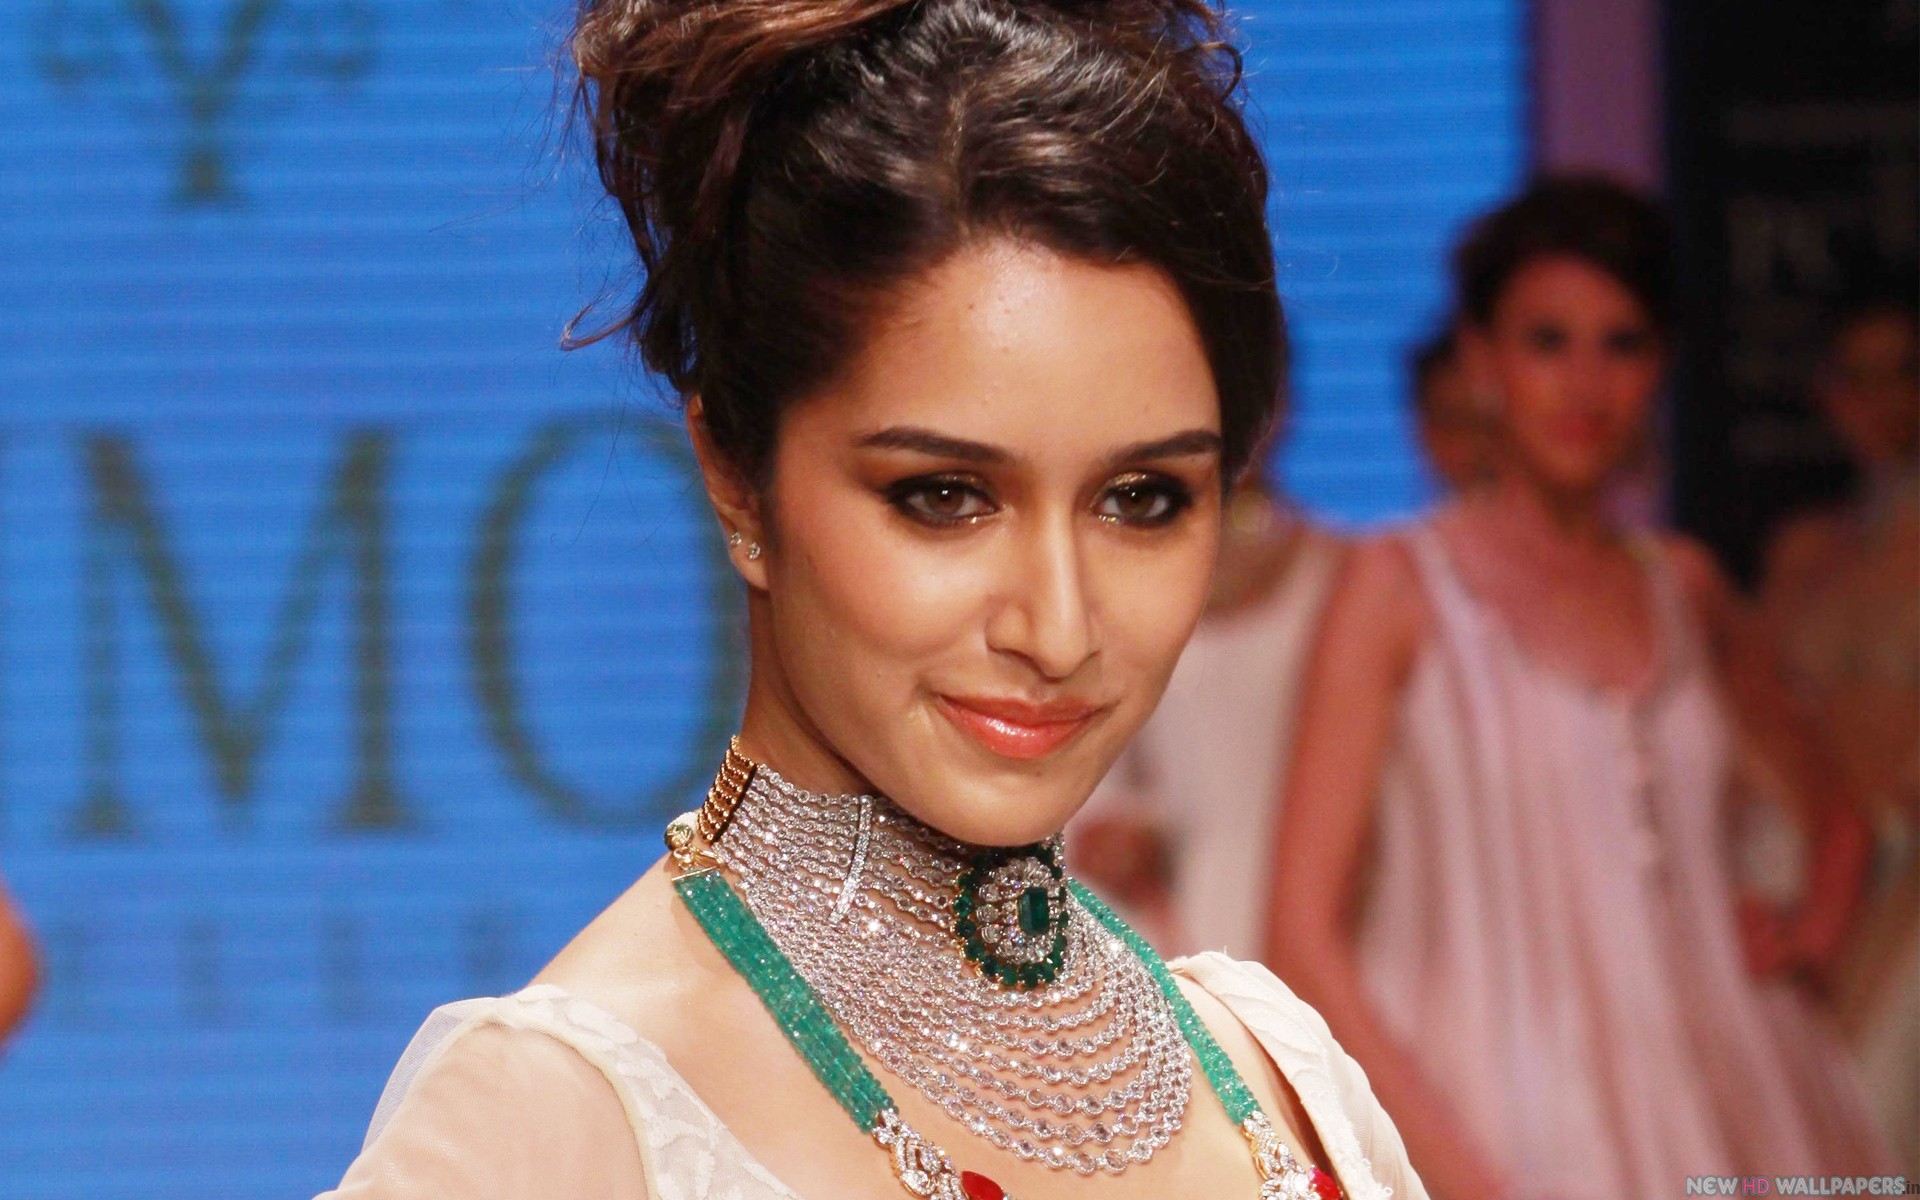 Shraddha Kapoor wallpapers, Celebrity, HQ Shraddha Kapoor pictures | 4K  Wallpapers 2019